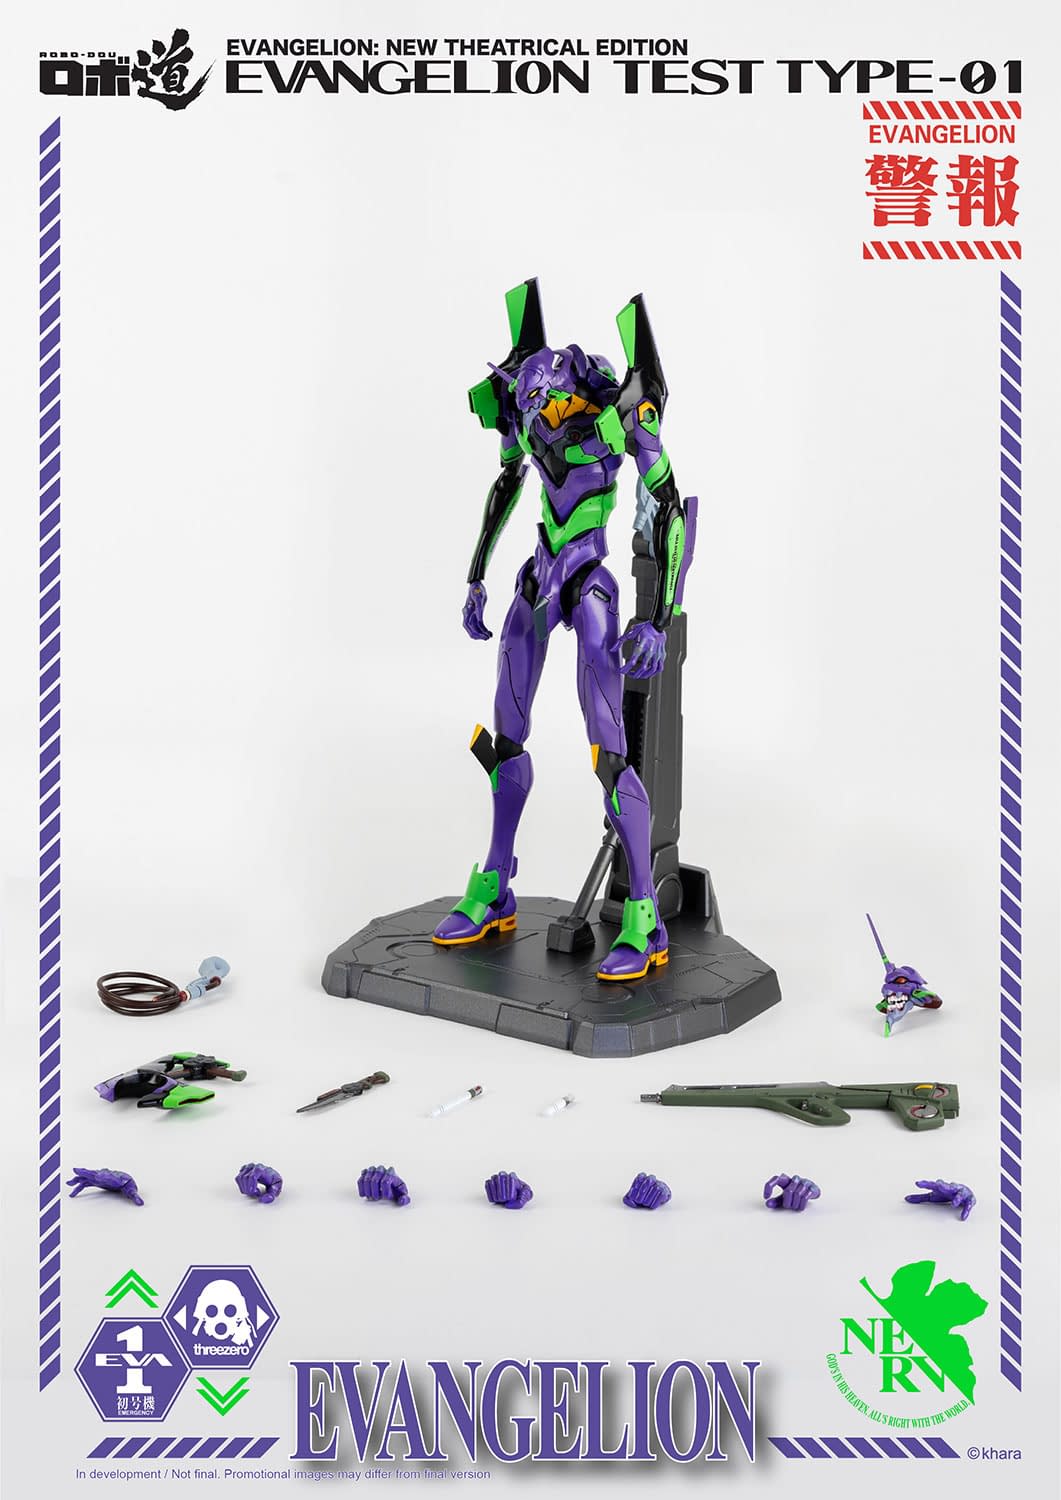 "Evangelion" Is Getting a Theatrical Edition Figure from Threezero